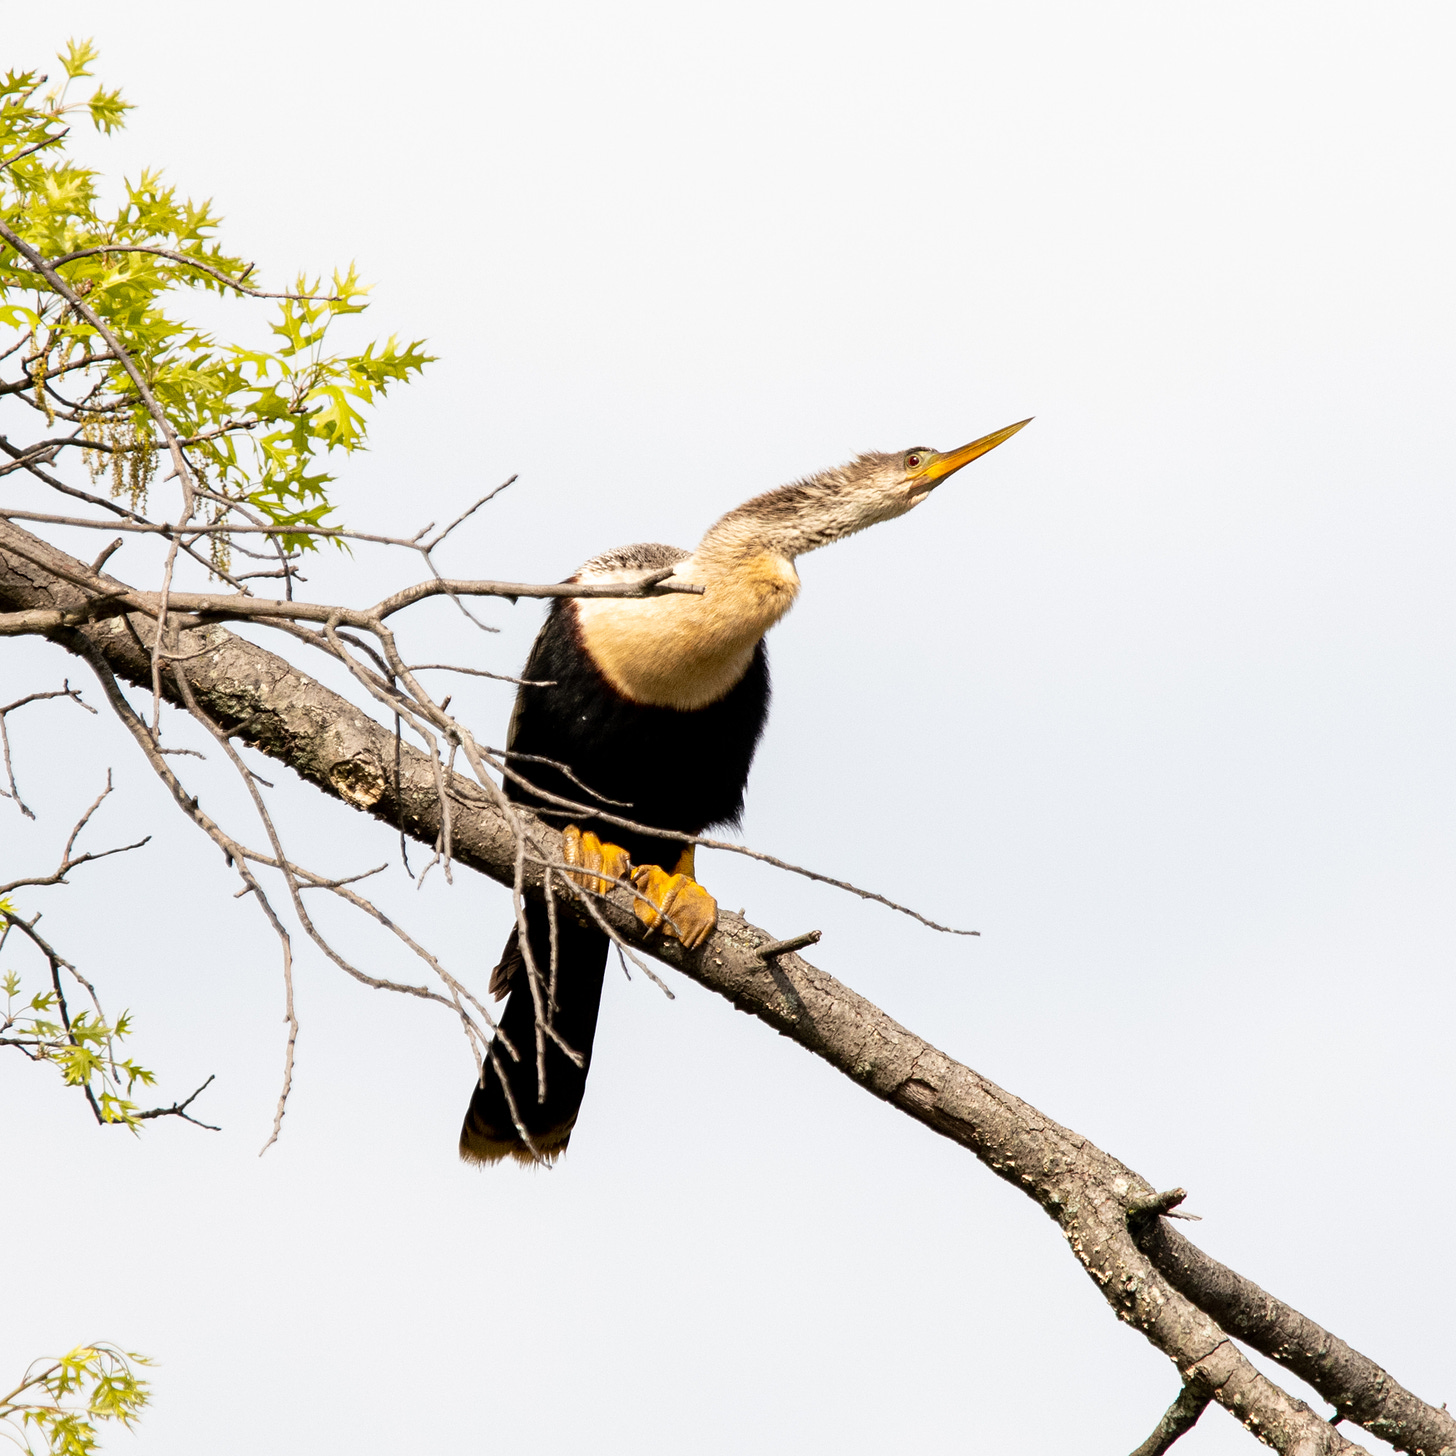 An anhinga, a relative of the cormorant with a snake-like neck, is perched on a bare oak branch